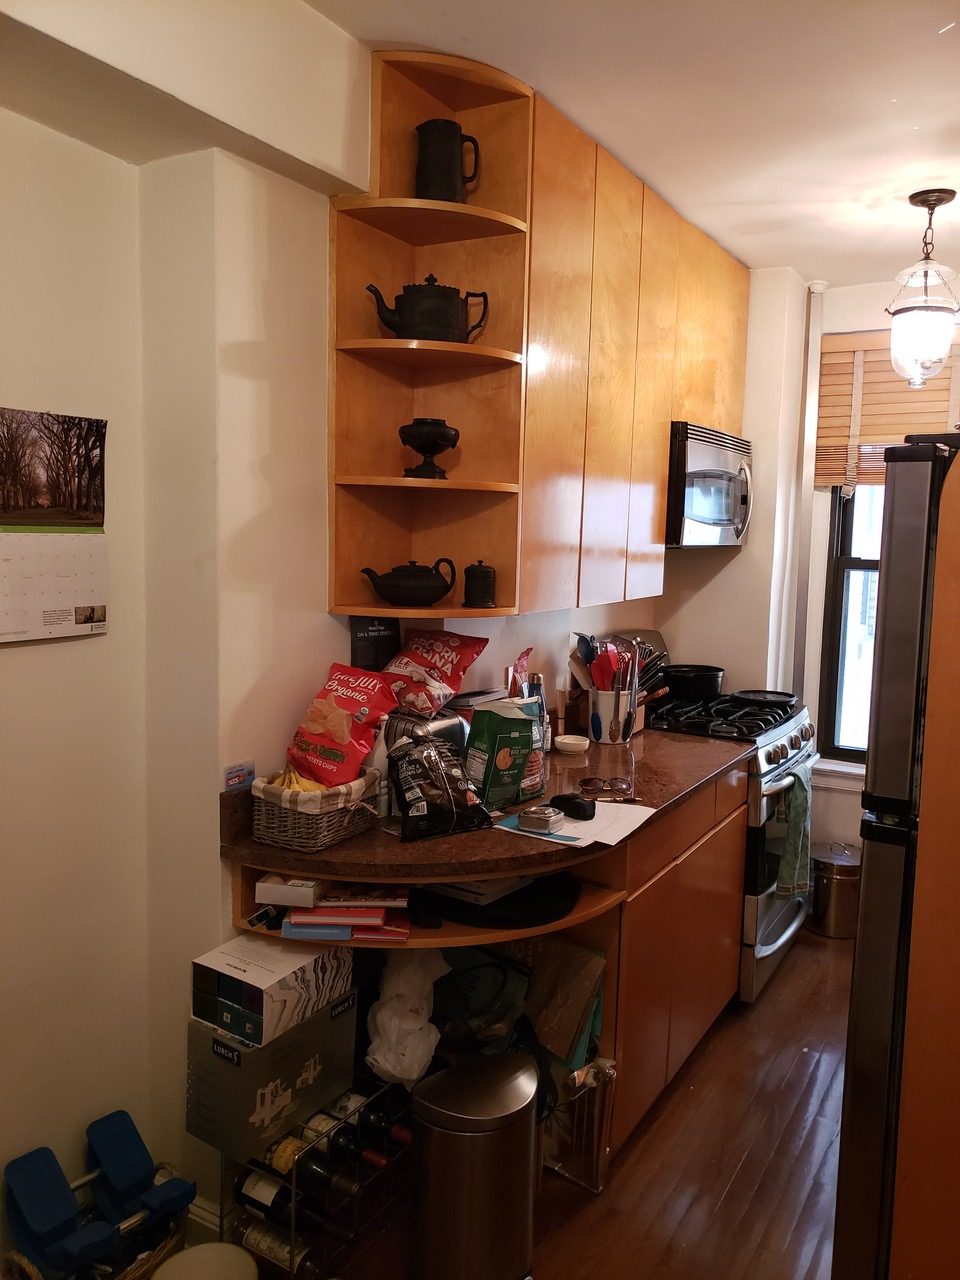 Before Photo - the remodel of a dated galley kitchen with curved corner shelving.